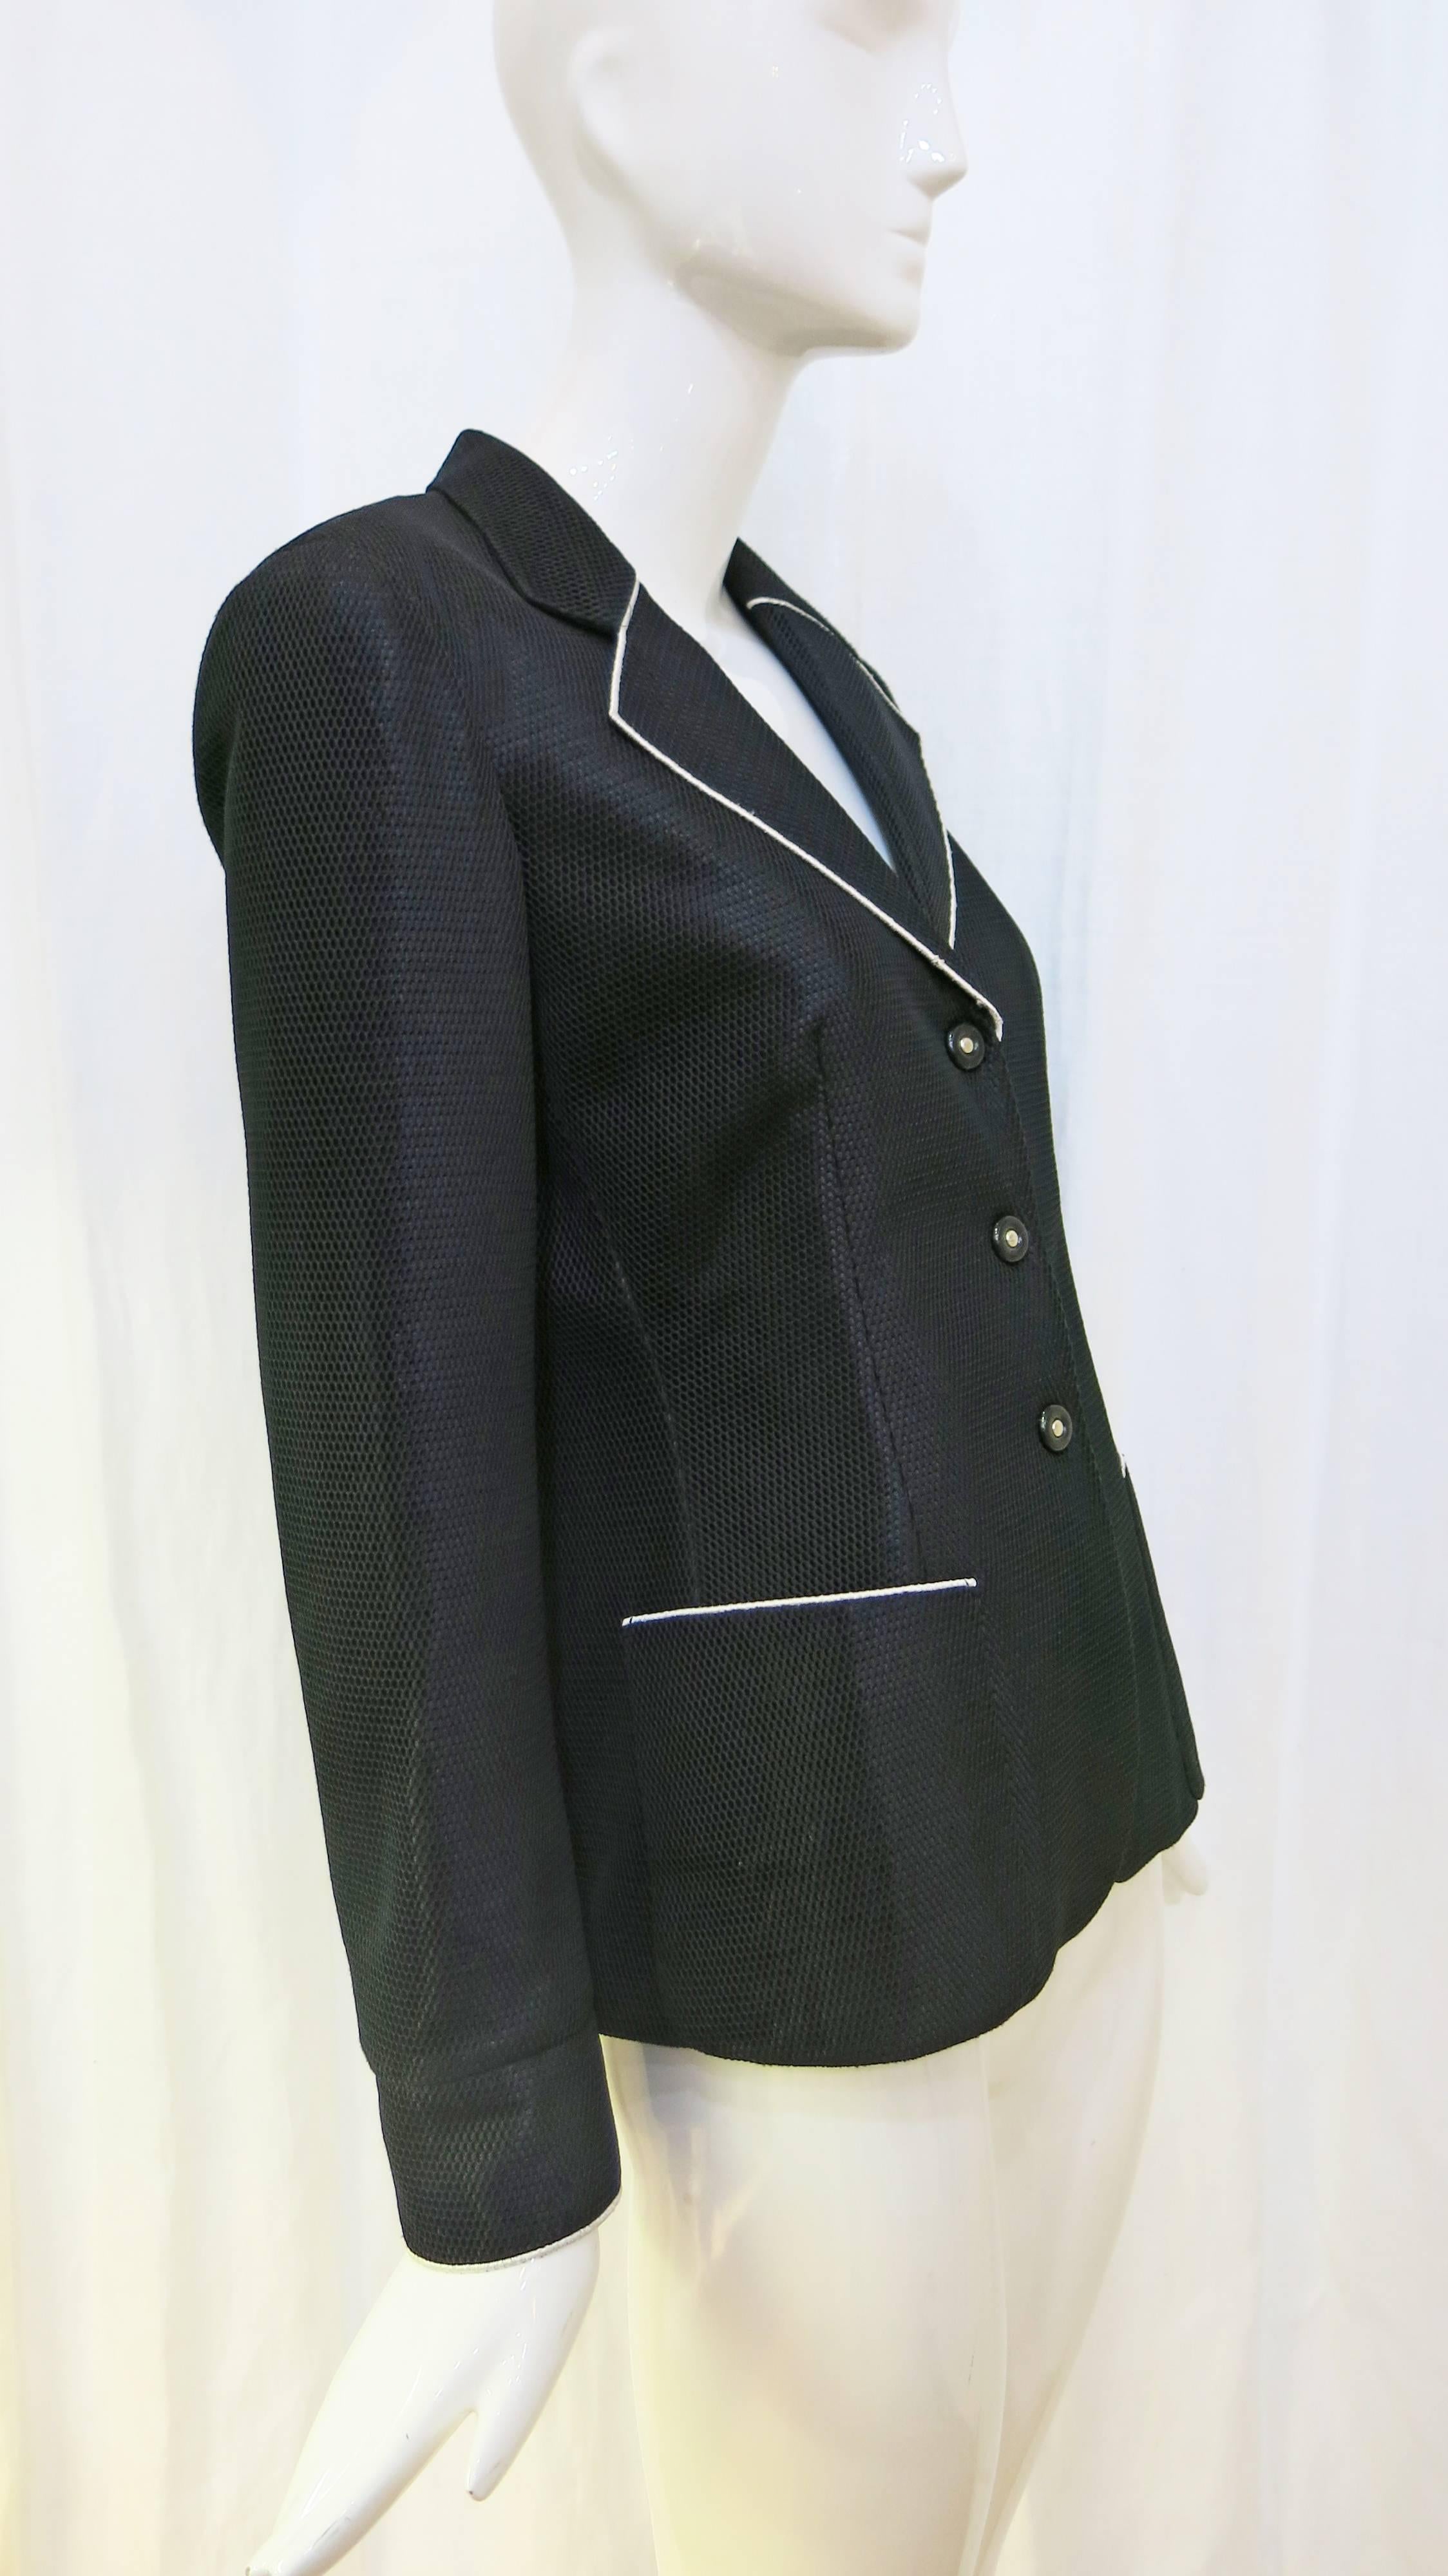 Black blazer with white trim and three snap buttons. Jacket has two front pockets and a mesh overlay on the outer layer. 

Jacket is a size 42 IT which is the equivalent of about a size 6 in US sizing. 

A perfect suiting addition to the